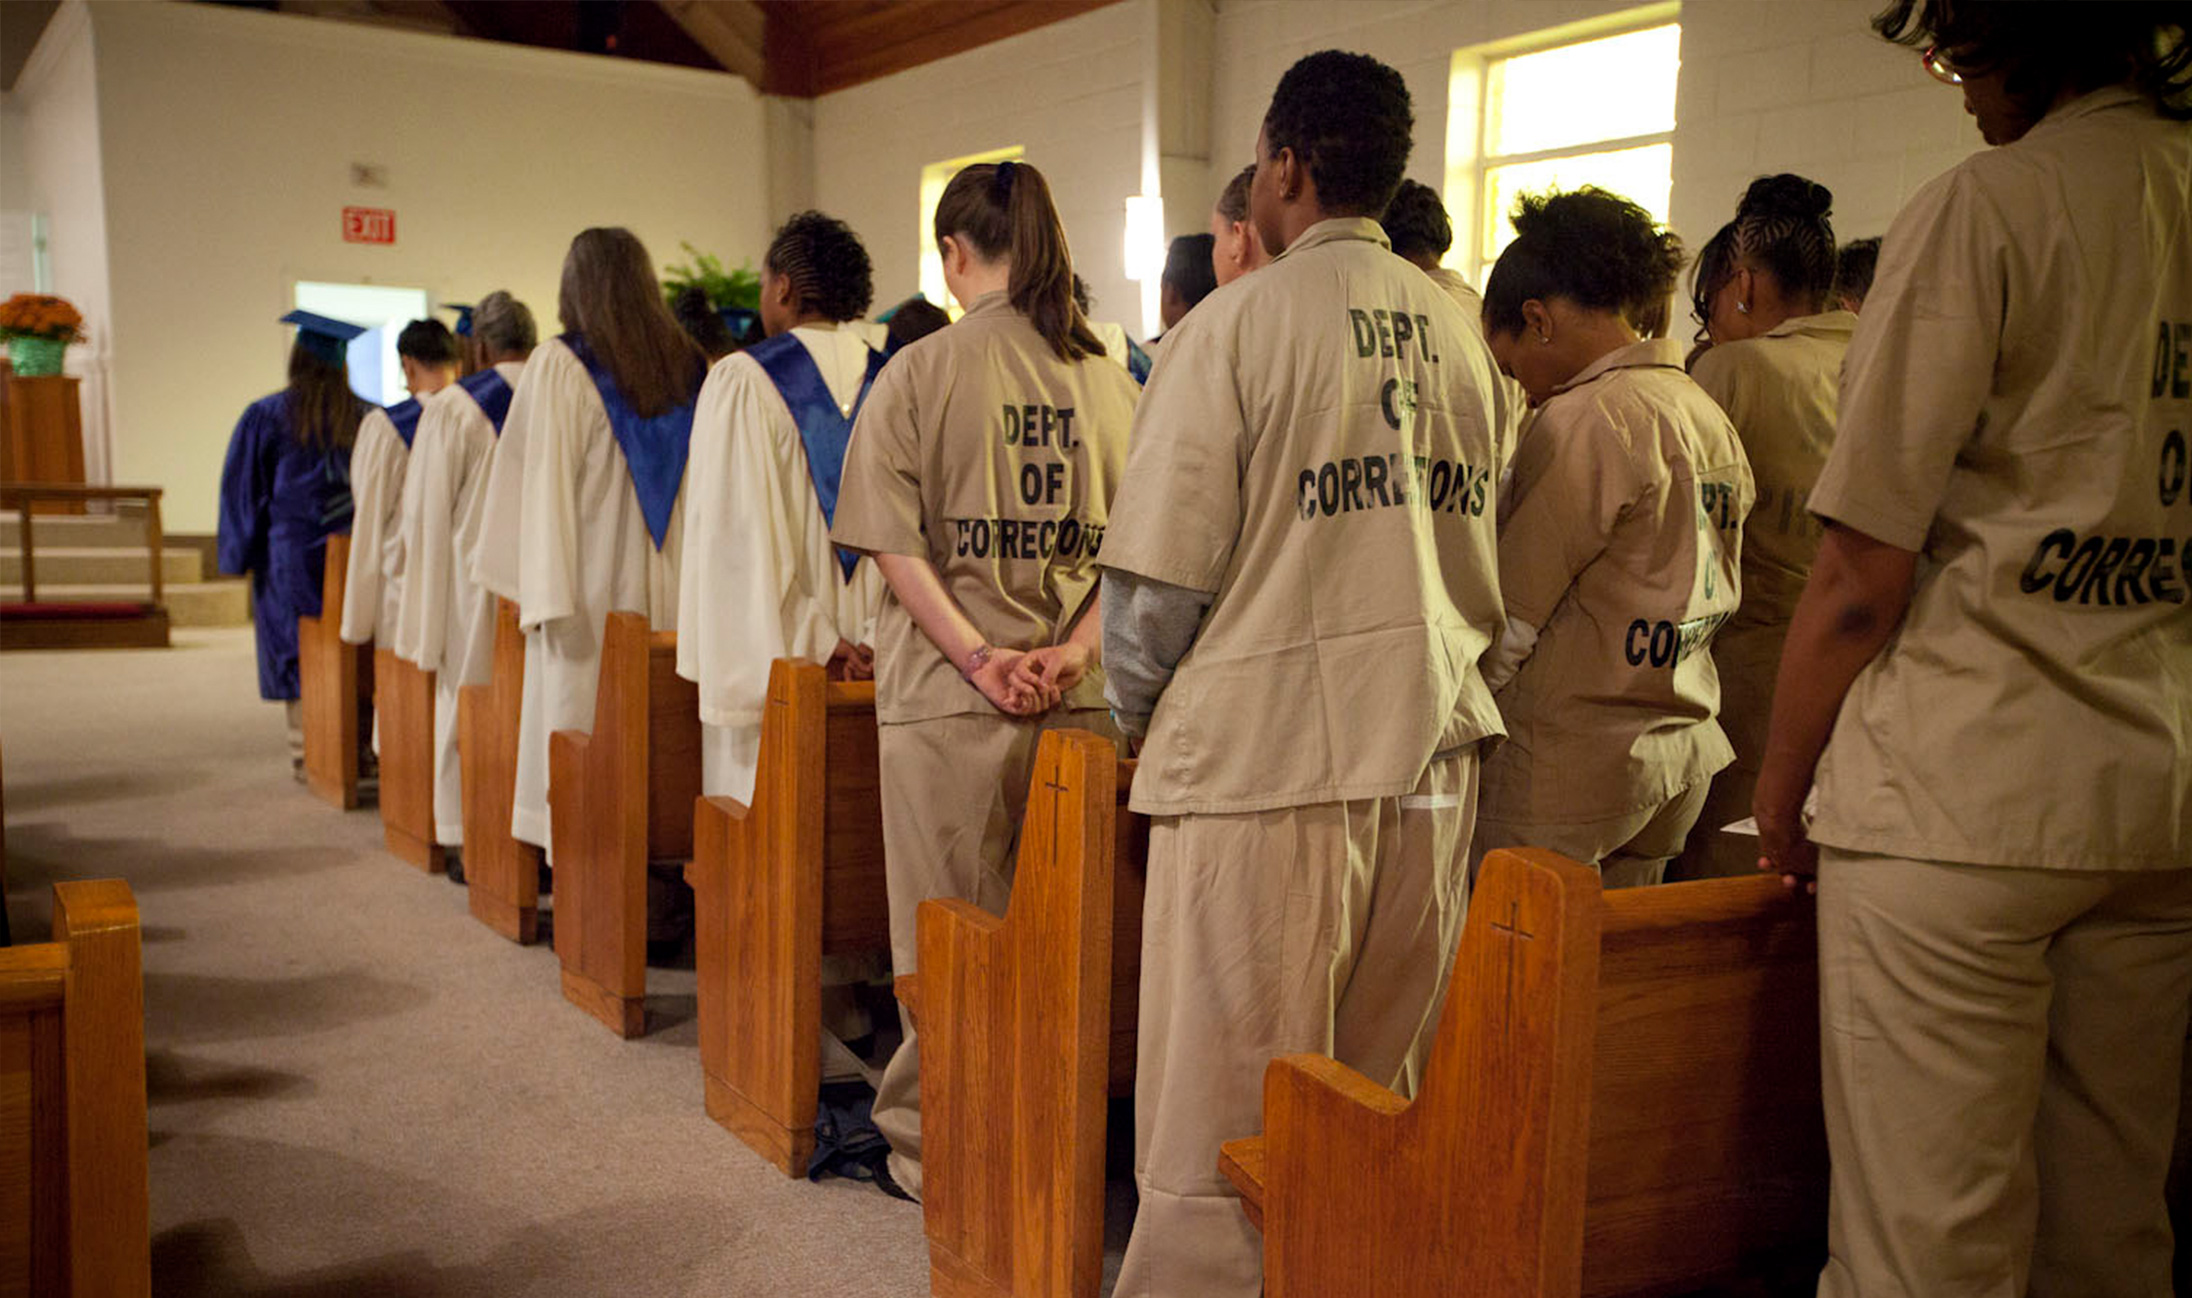 Candler School of Theology Con Ed Arrendale State Prison